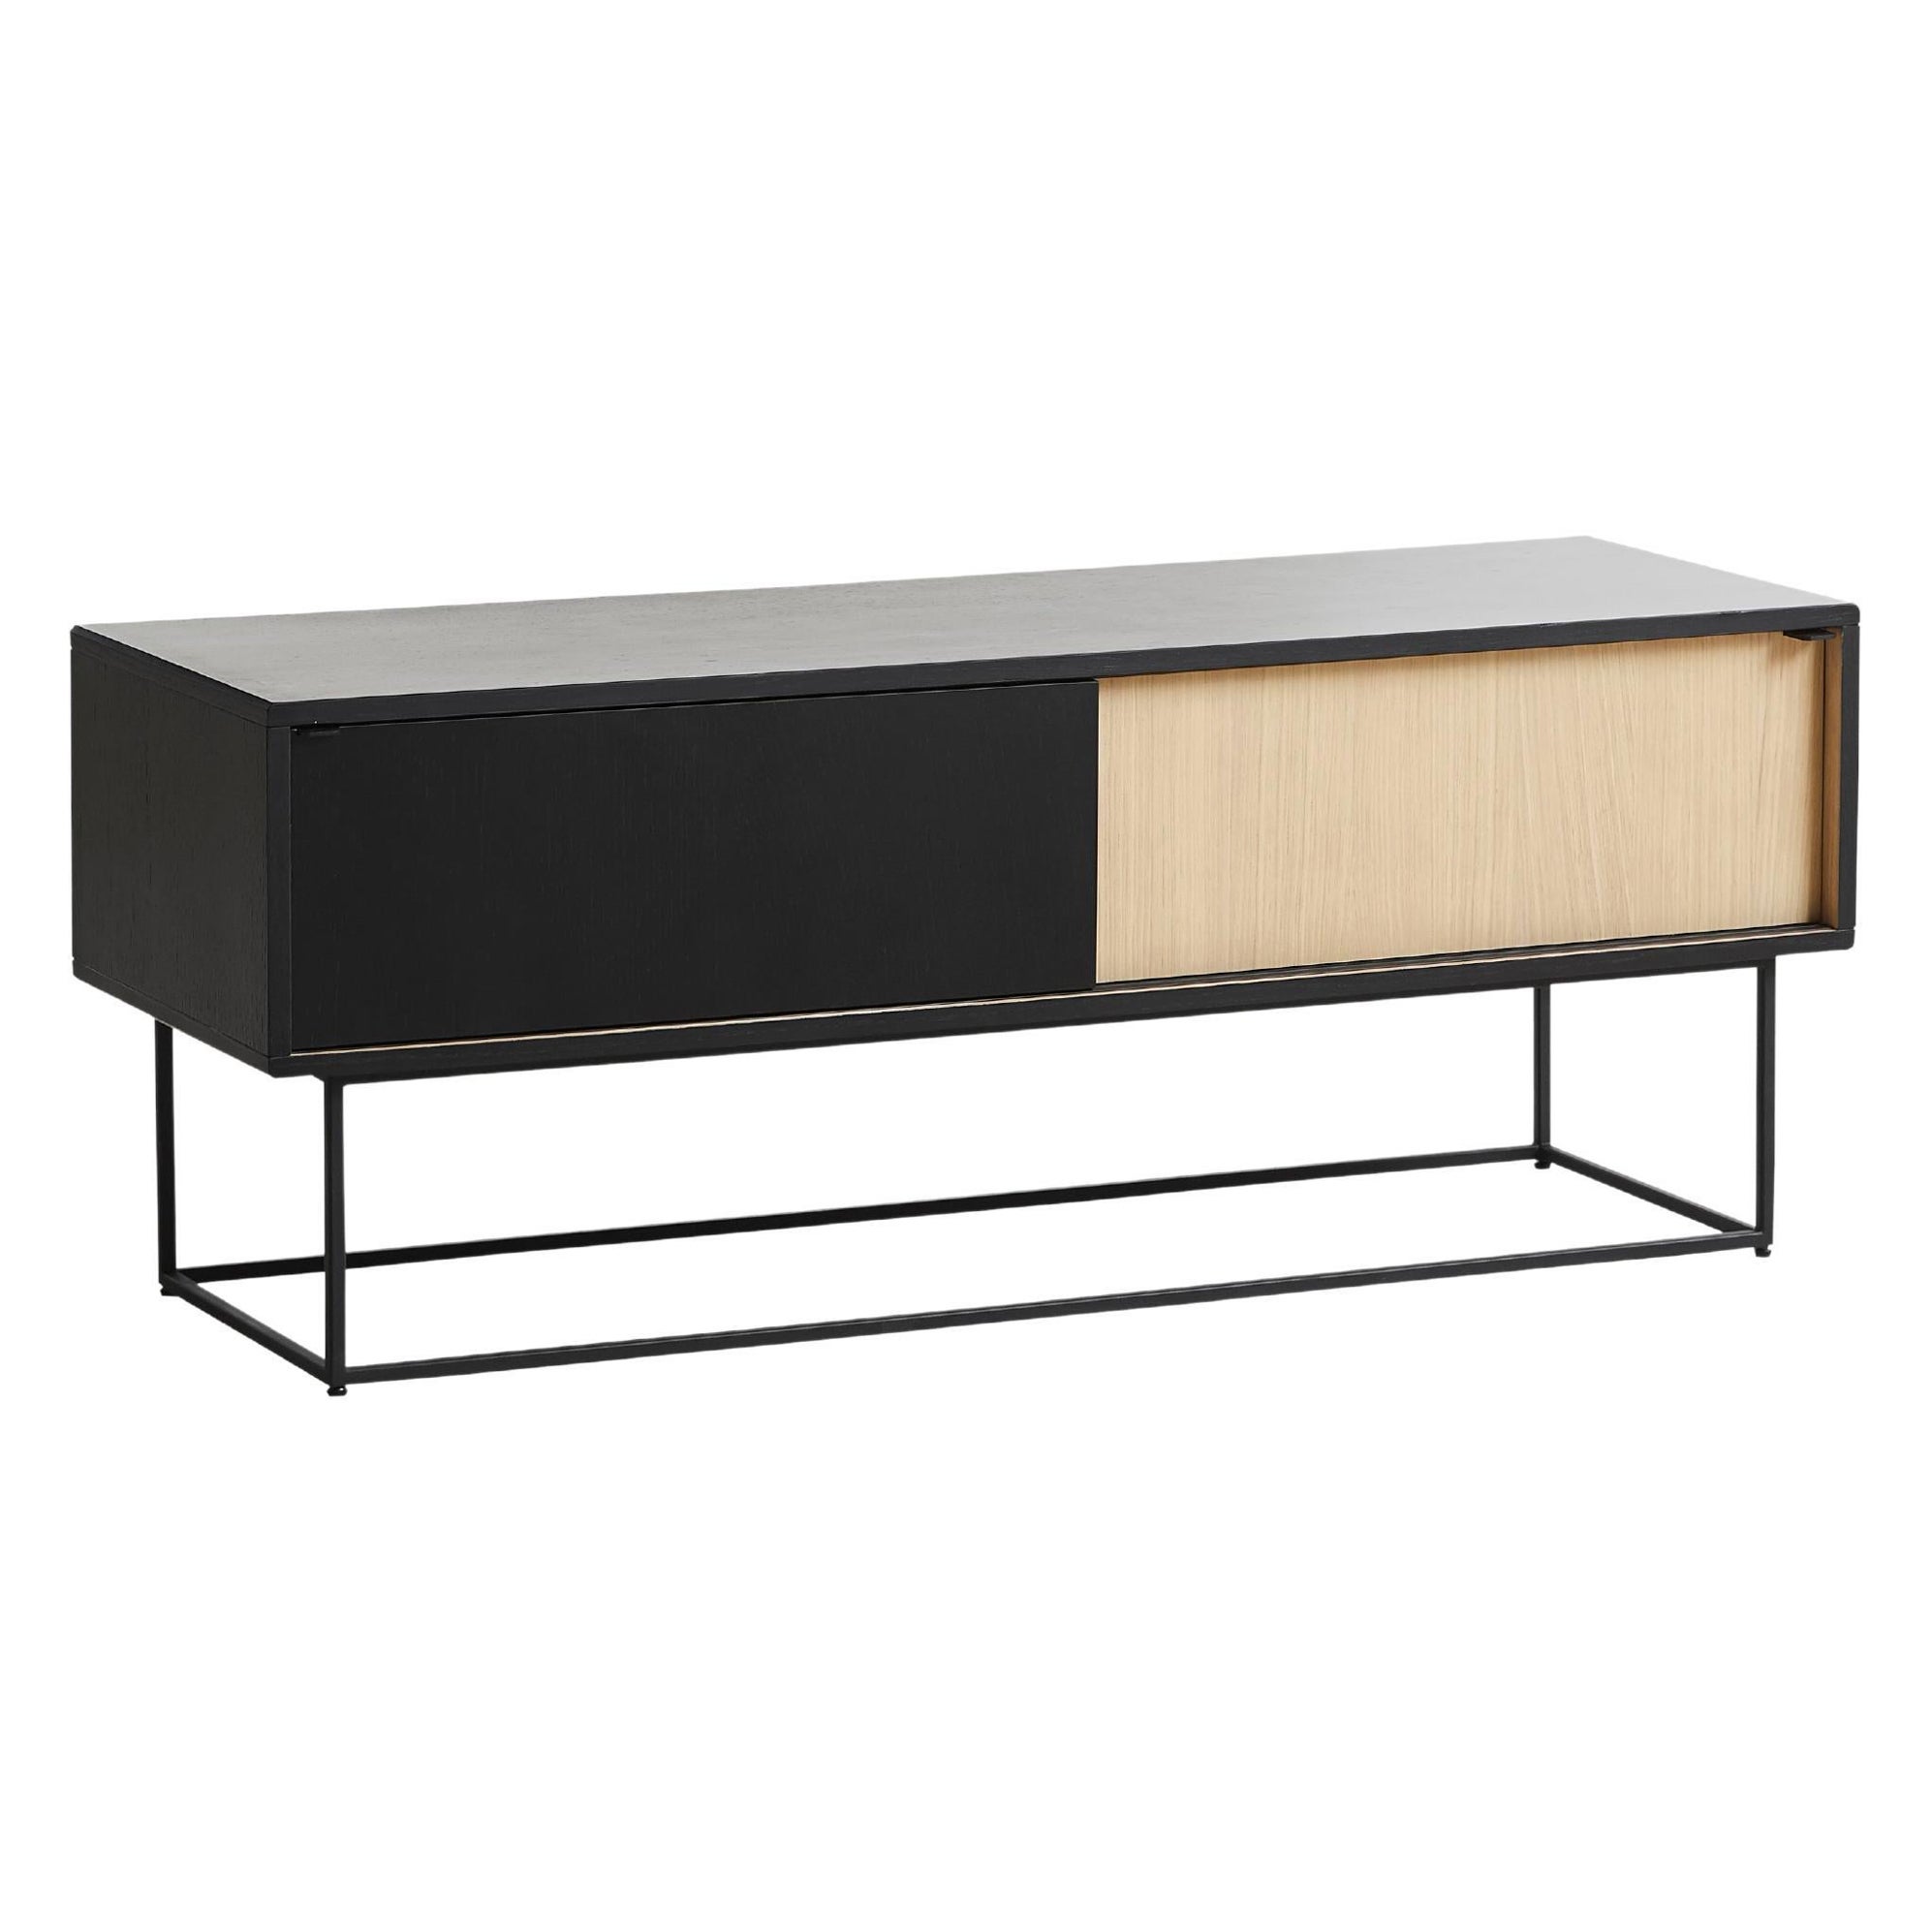 Black and White Virka Low Sideboard by Ropke Design and Moaak For Sale